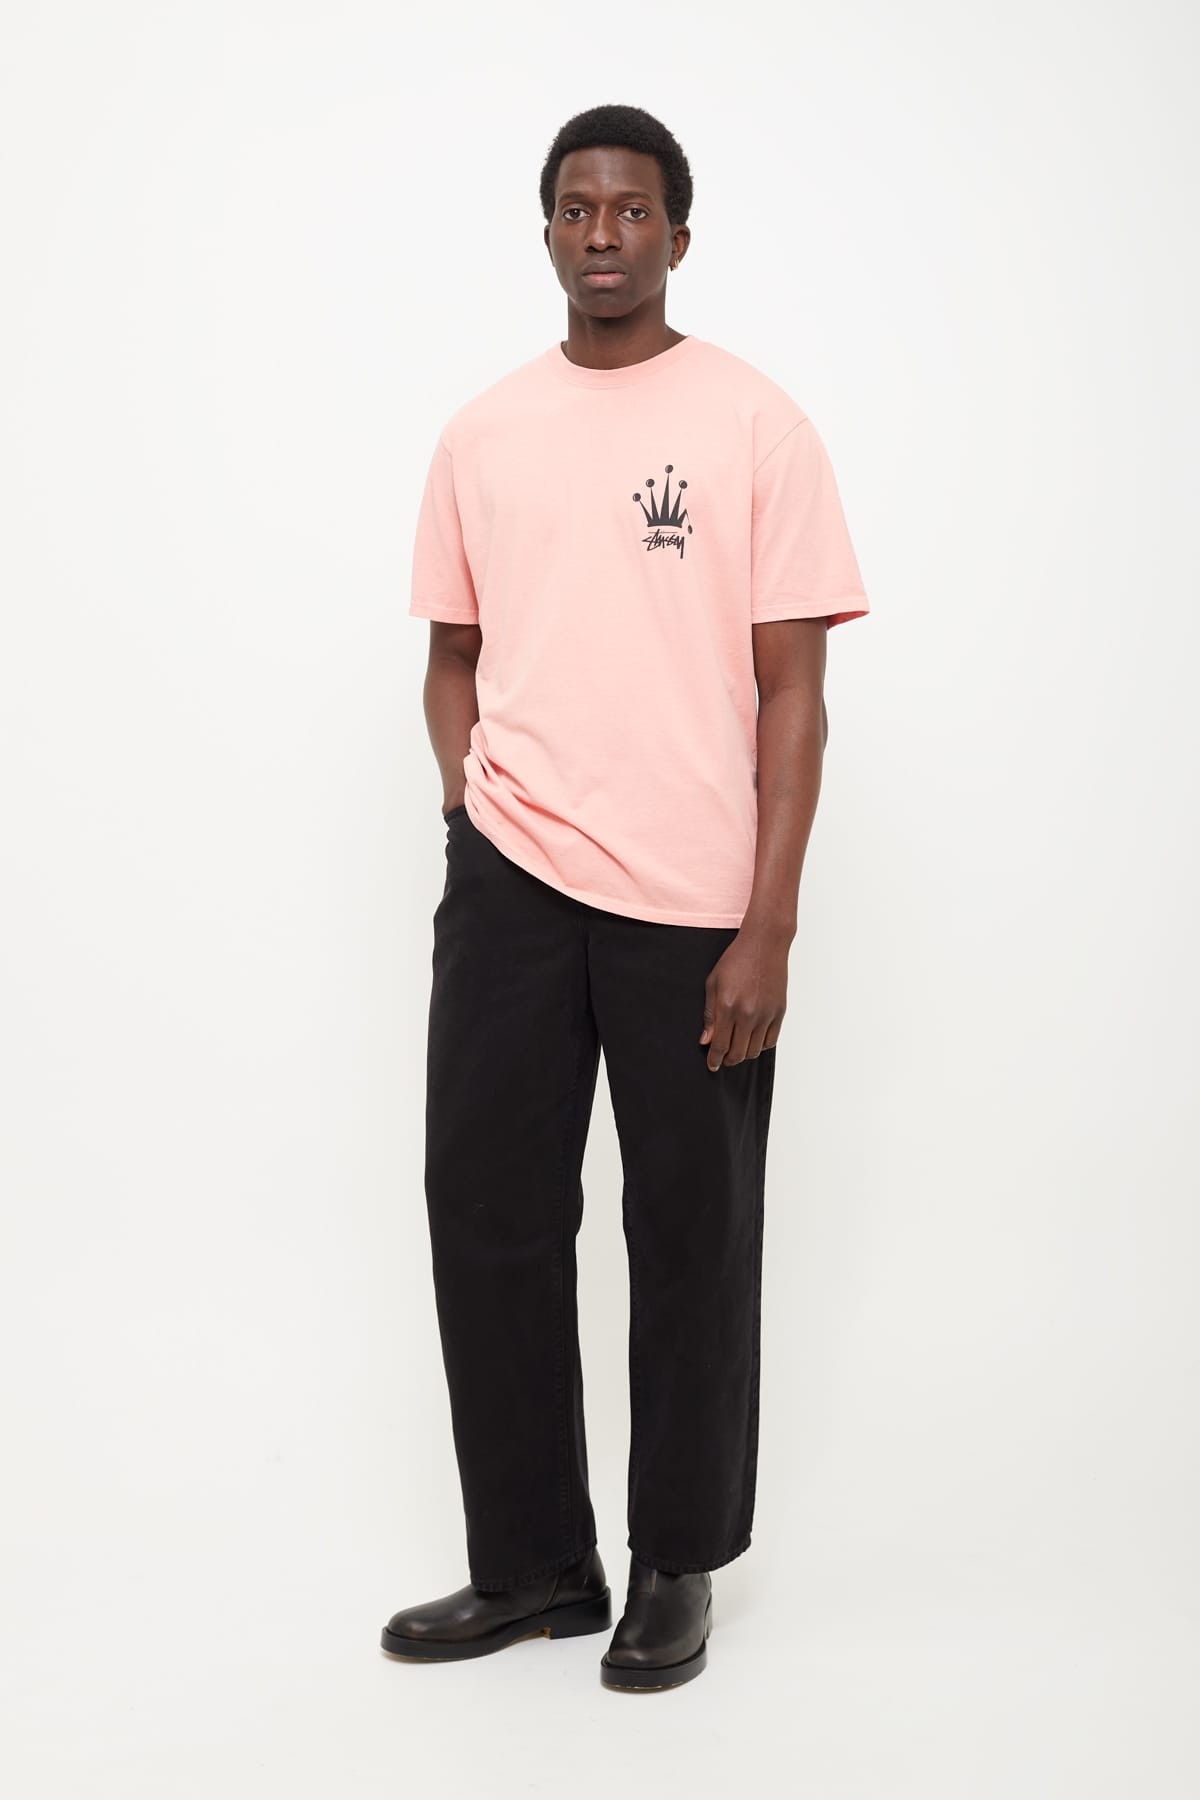 STUSSY CORAL PIG DYED REGAL CROWN T-SHIRT IAMNUE